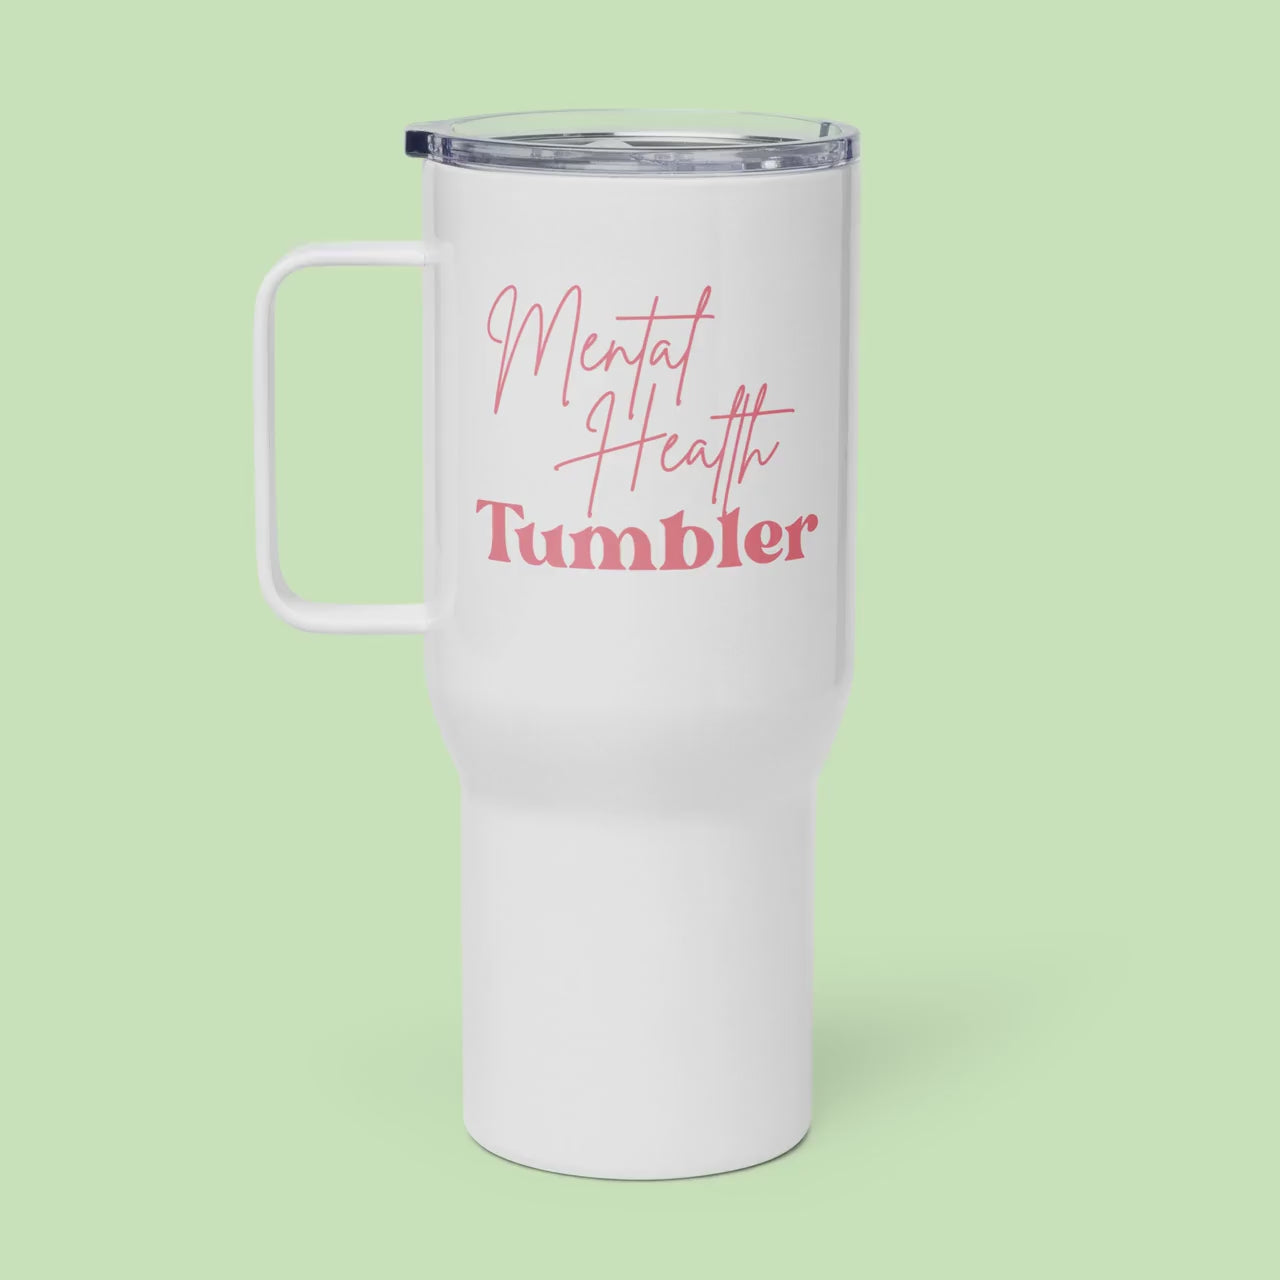 Mental Health Tumbler 'Mood Swing Sweets', Valentines Day, Self Love, Self Care, Part of Profit donated to charity, Valentines Gift